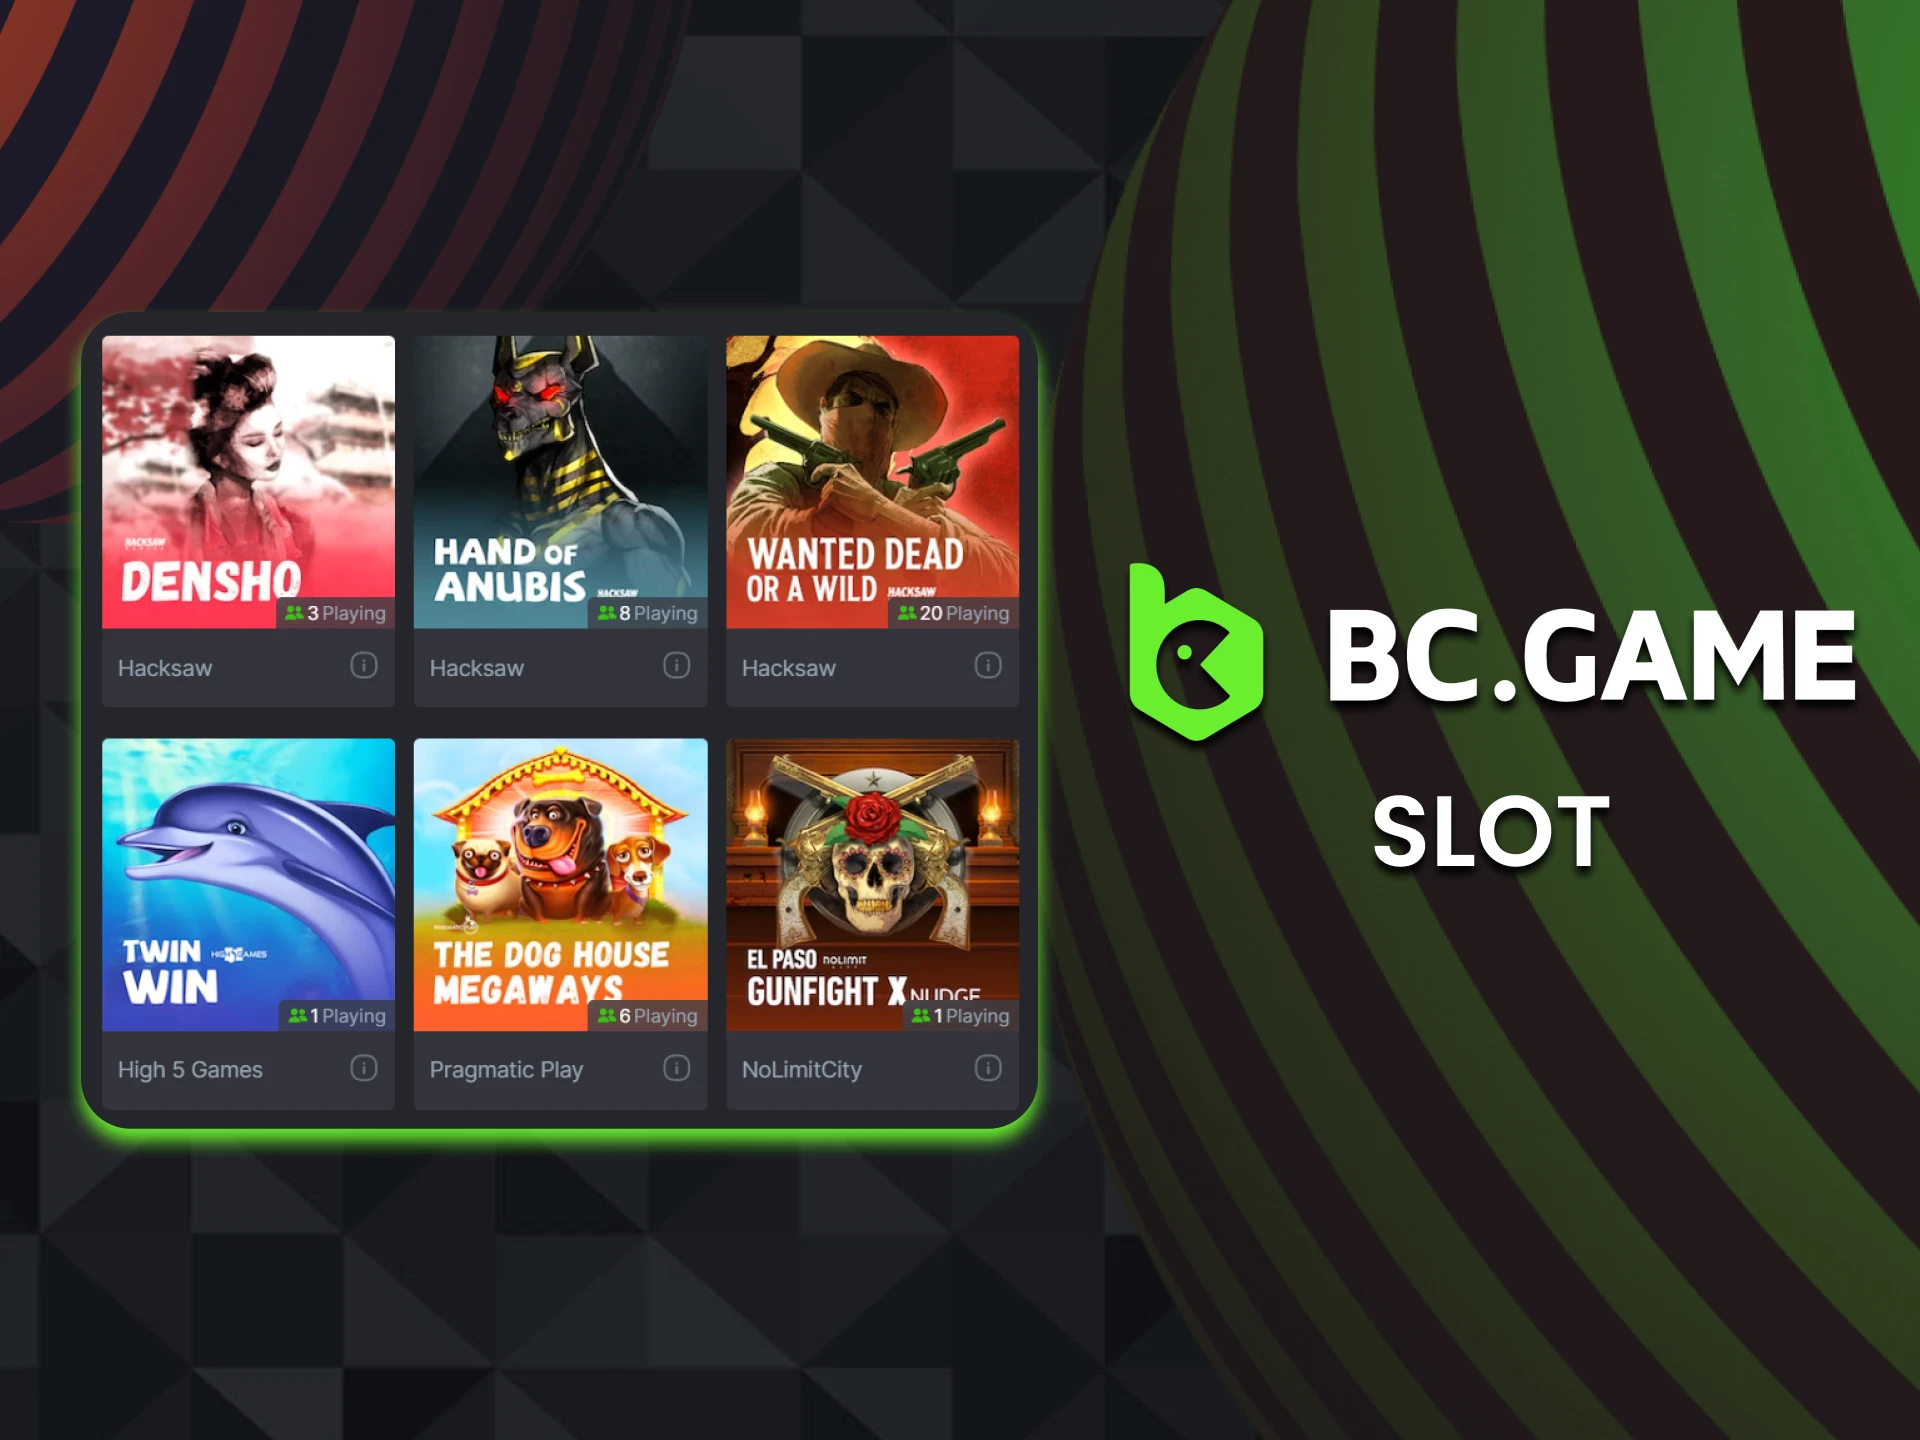 There are many slots at the BC Game online casino.